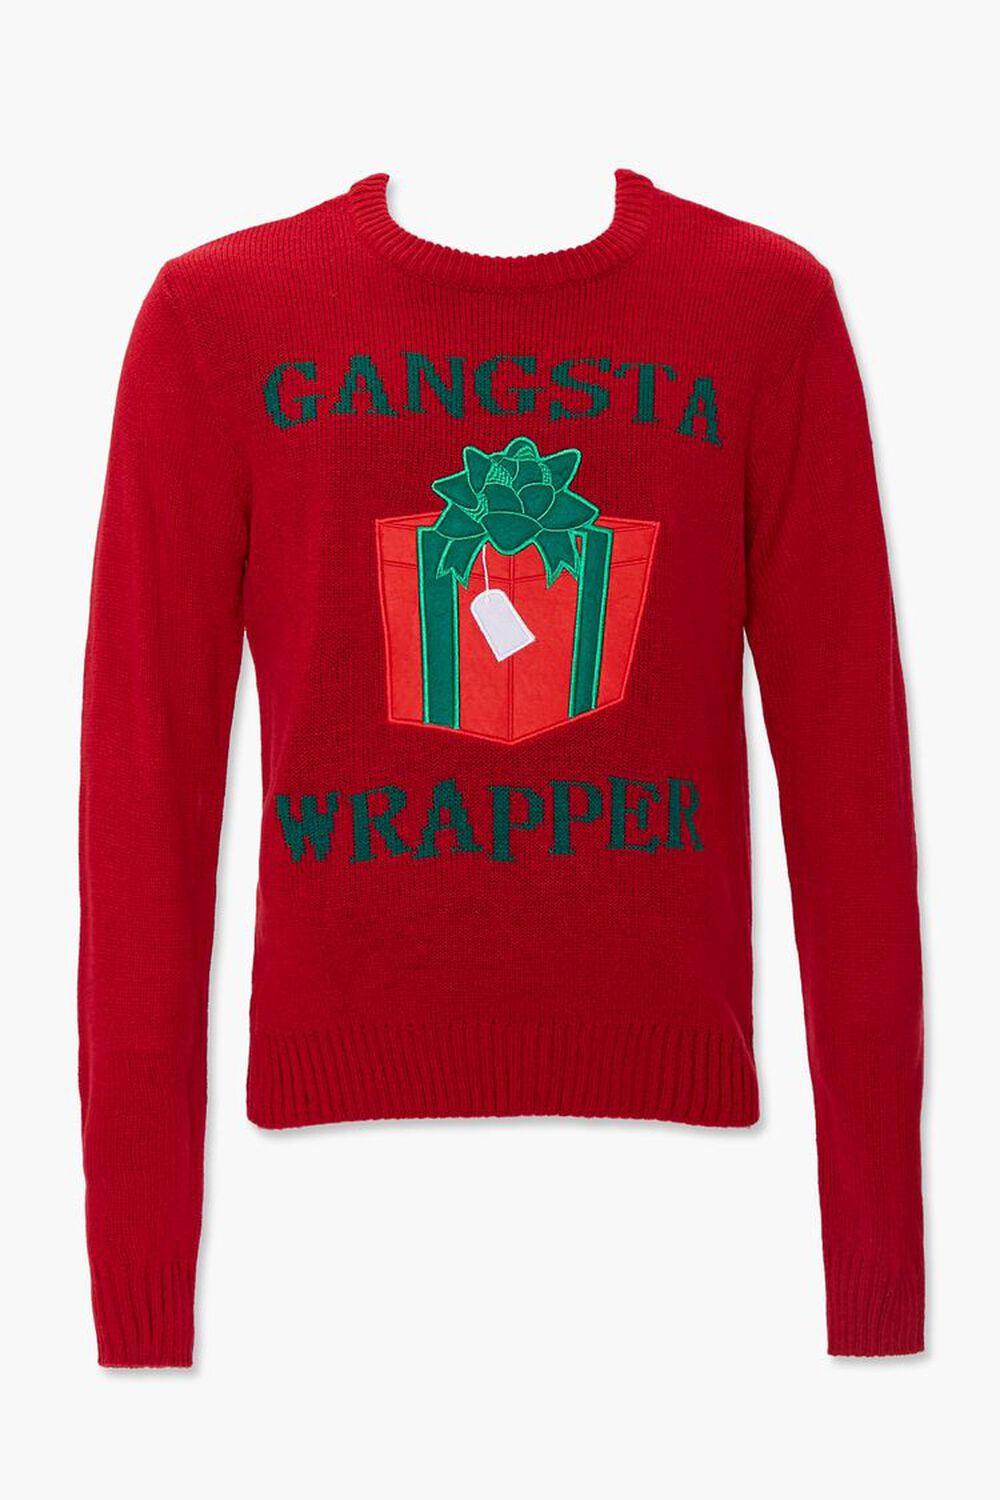 RED/MULTI Gangsta Wrapper Graphic Knit Sweater, image 1